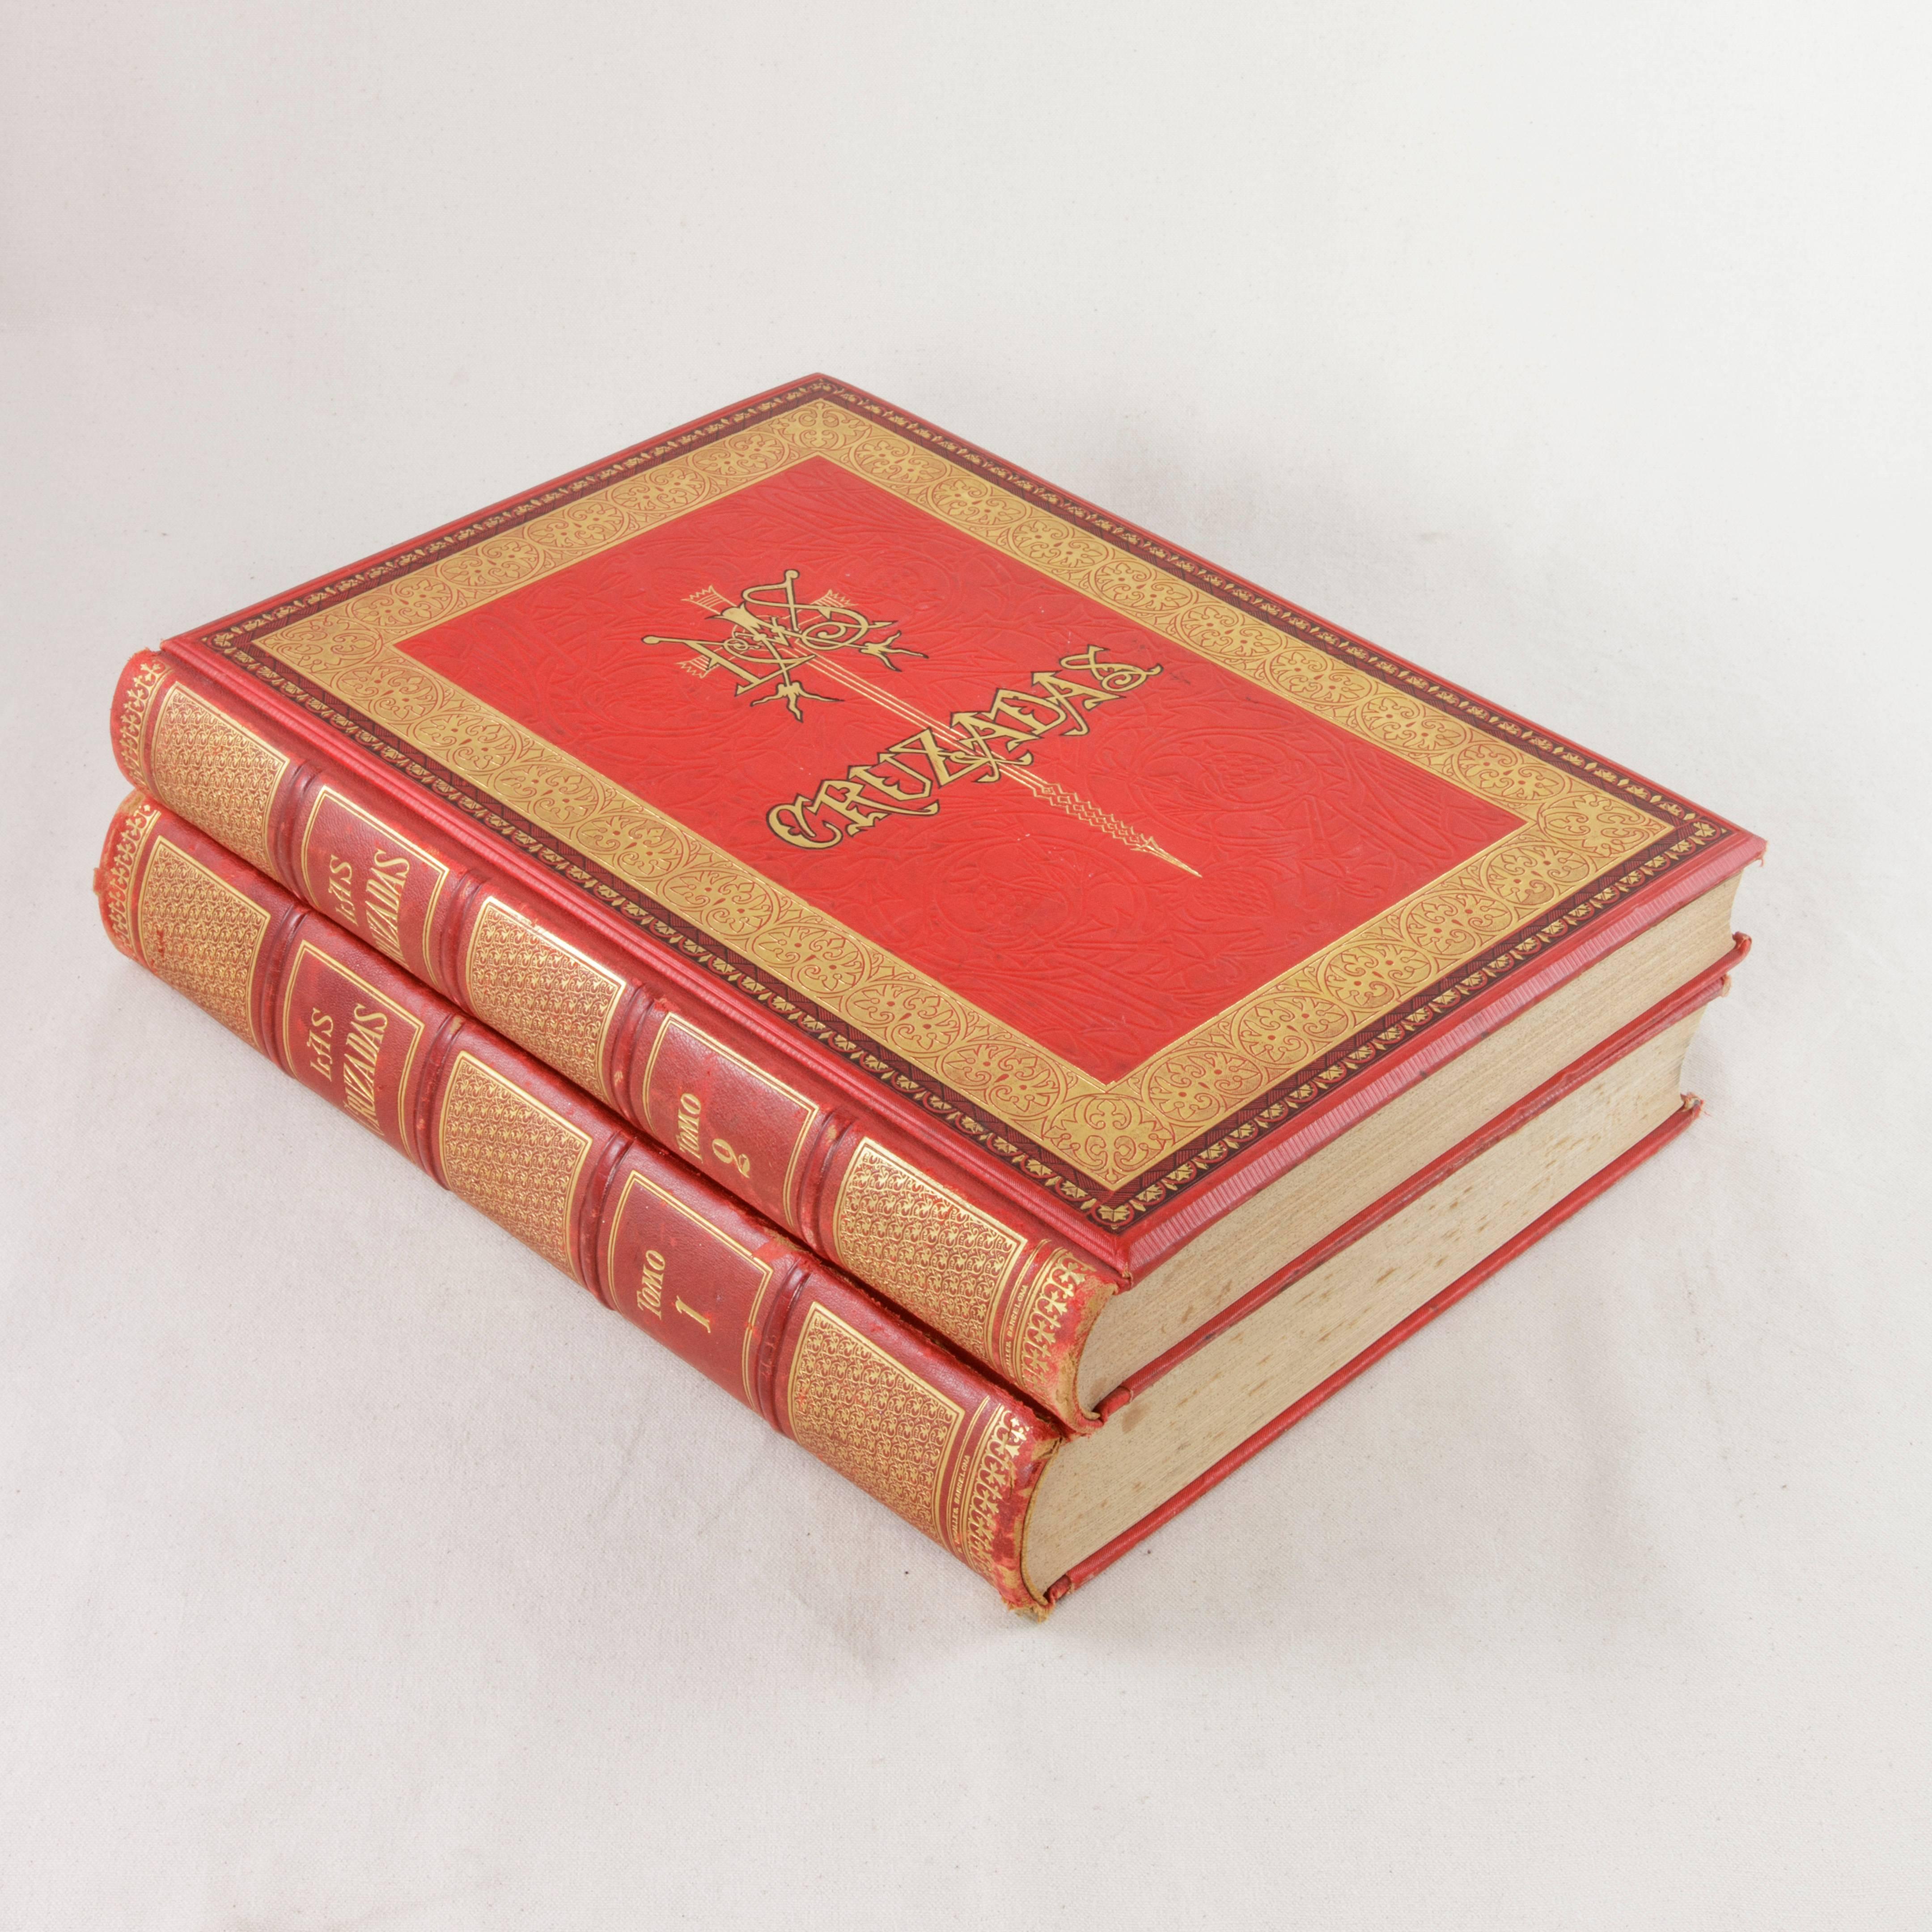 This large pair of red leather books from the late 19th century features gold tooling around the borders of the cover as well as a central cross. Entitled Las Cruzadas and written in Spanish, this two volume set chronicles the history of the